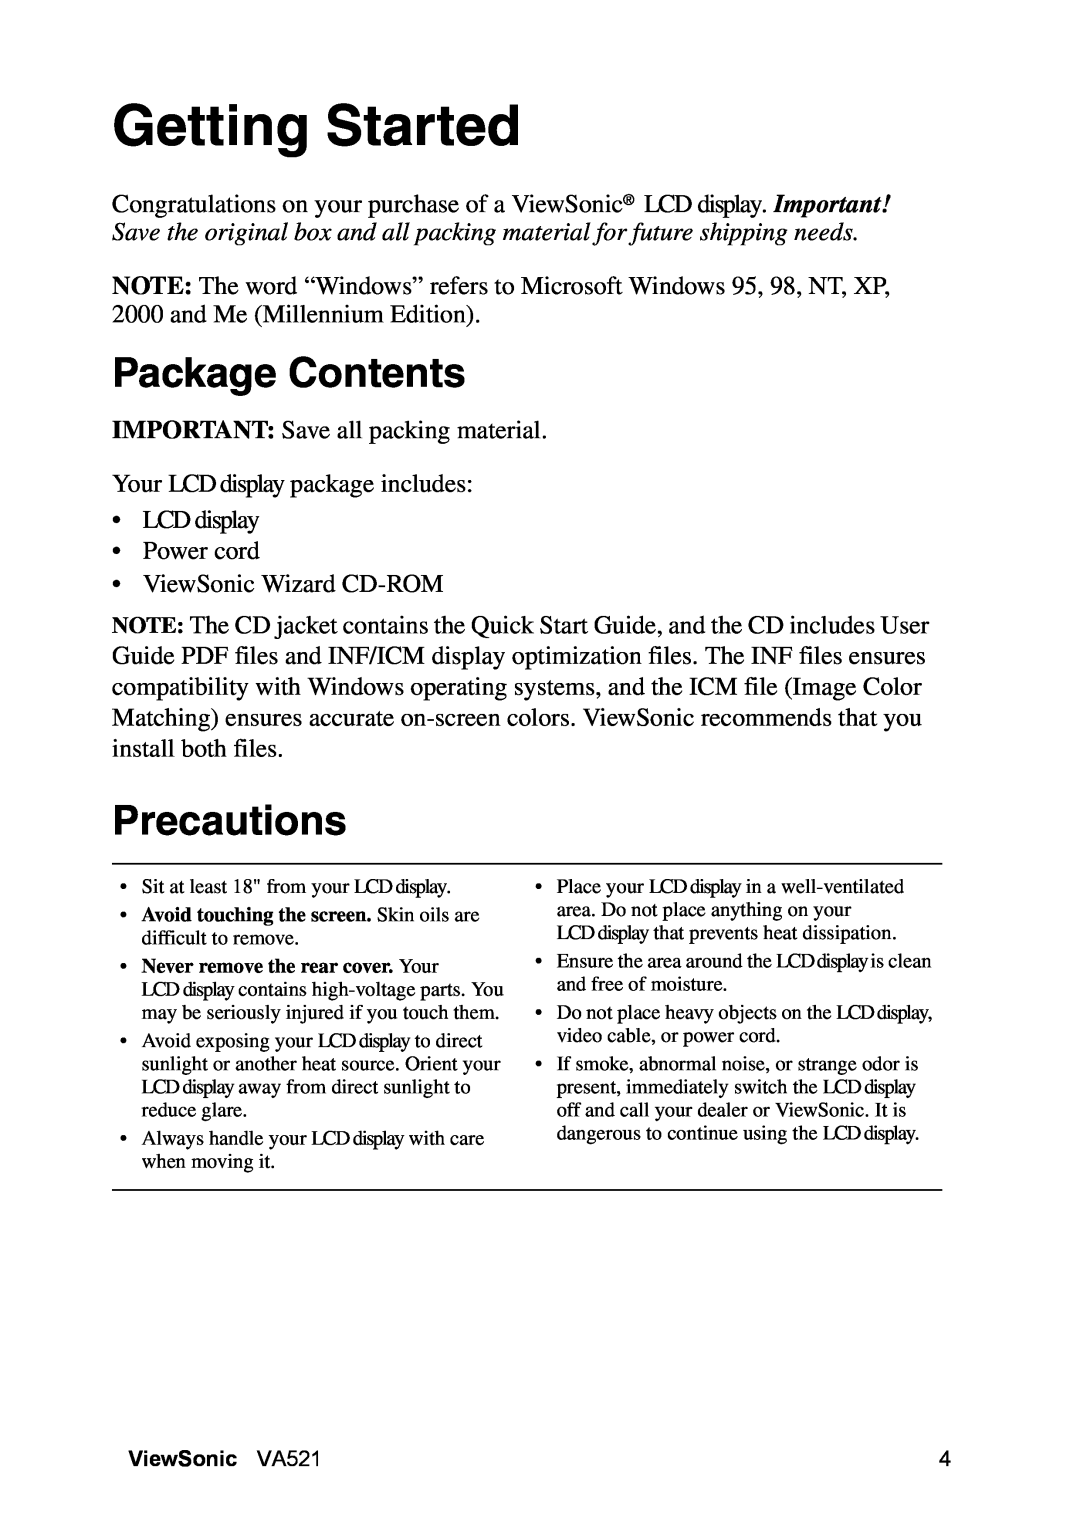 ViewSonic VA521 manual Getting Started, Package Contents, Precautions 